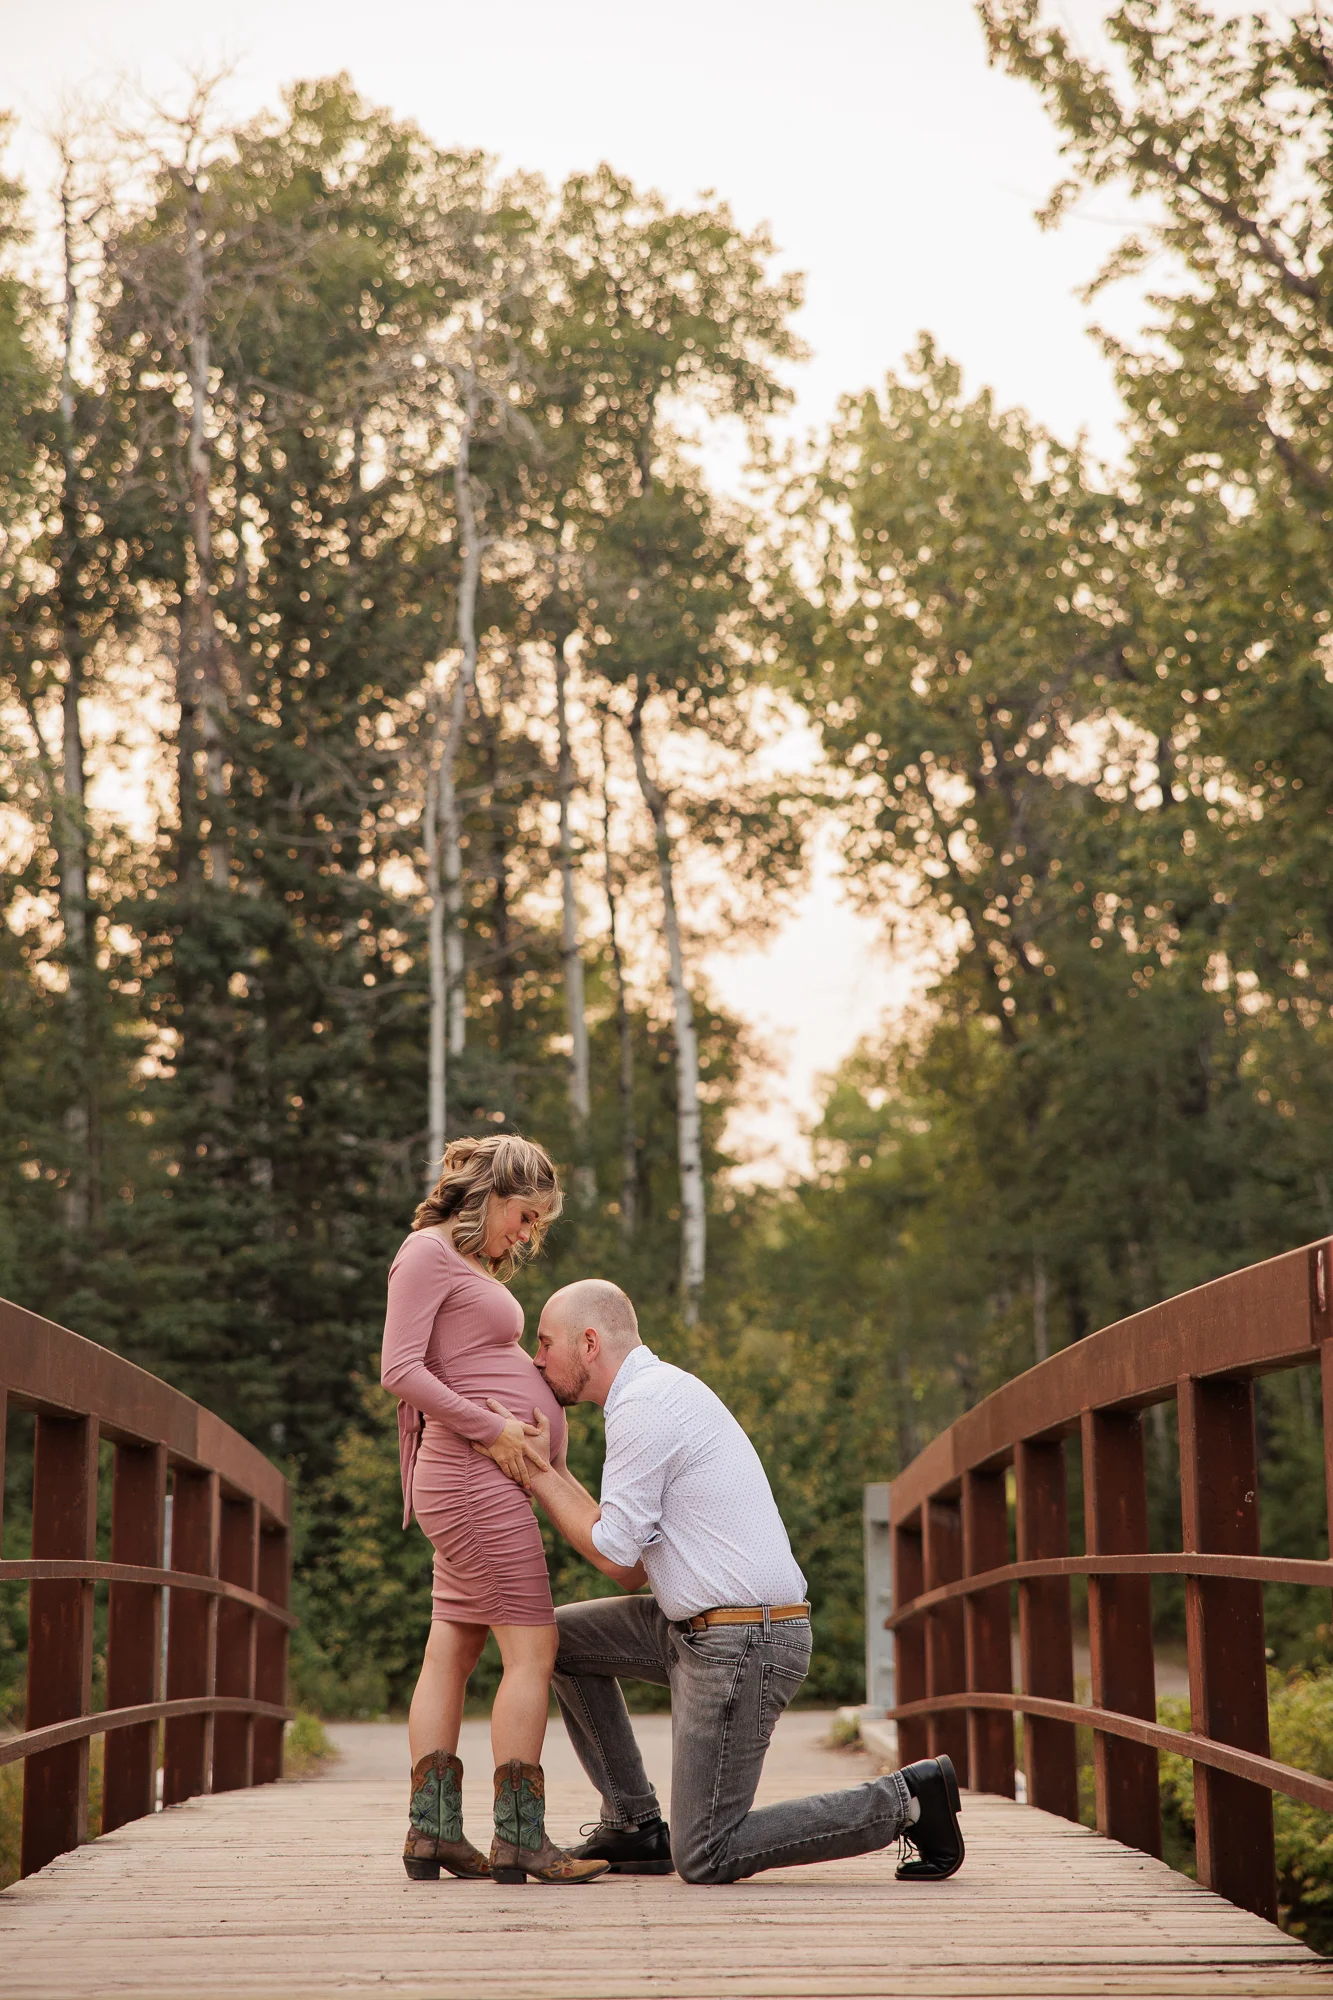 A Stunning Maternity Photoshoot at Fish Creek Provincial Park in